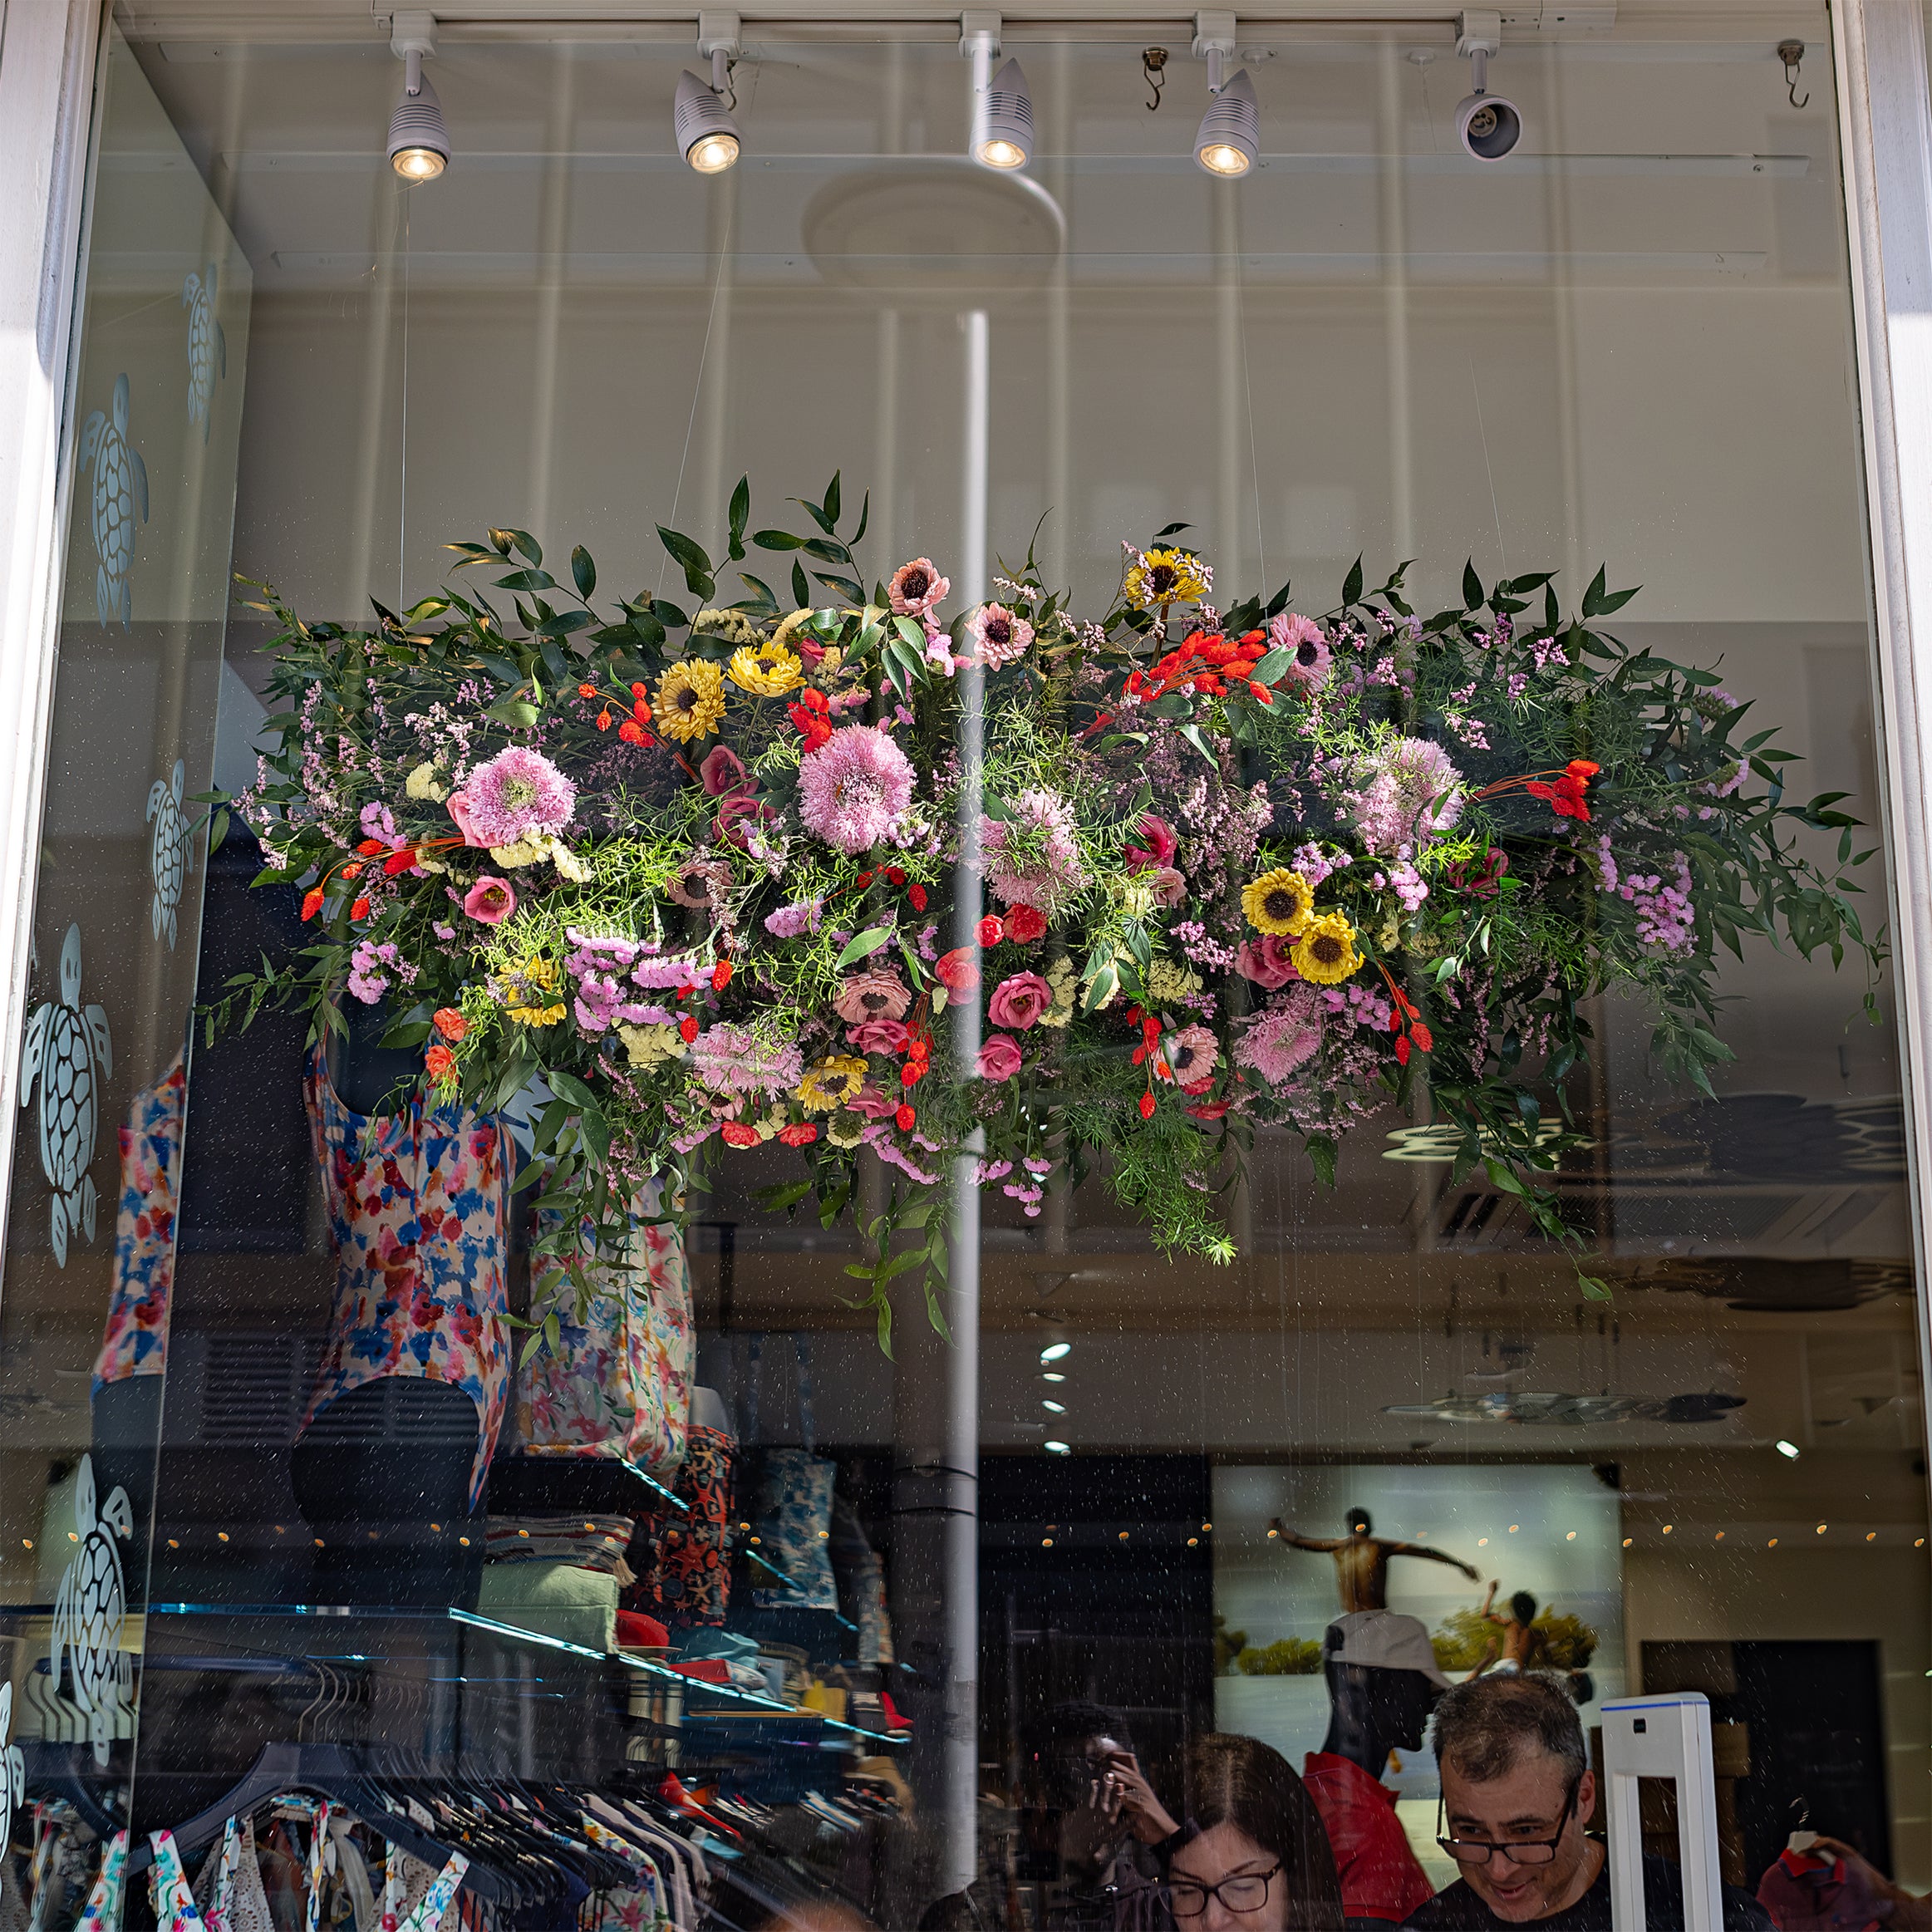 A lush hanging floral installation by Amaranté London, suspended in the Vilebrequin store window for Chelsea in Bloom, featuring a mix of pink, yellow, and red flowers, creating a whimsical and elegant display.